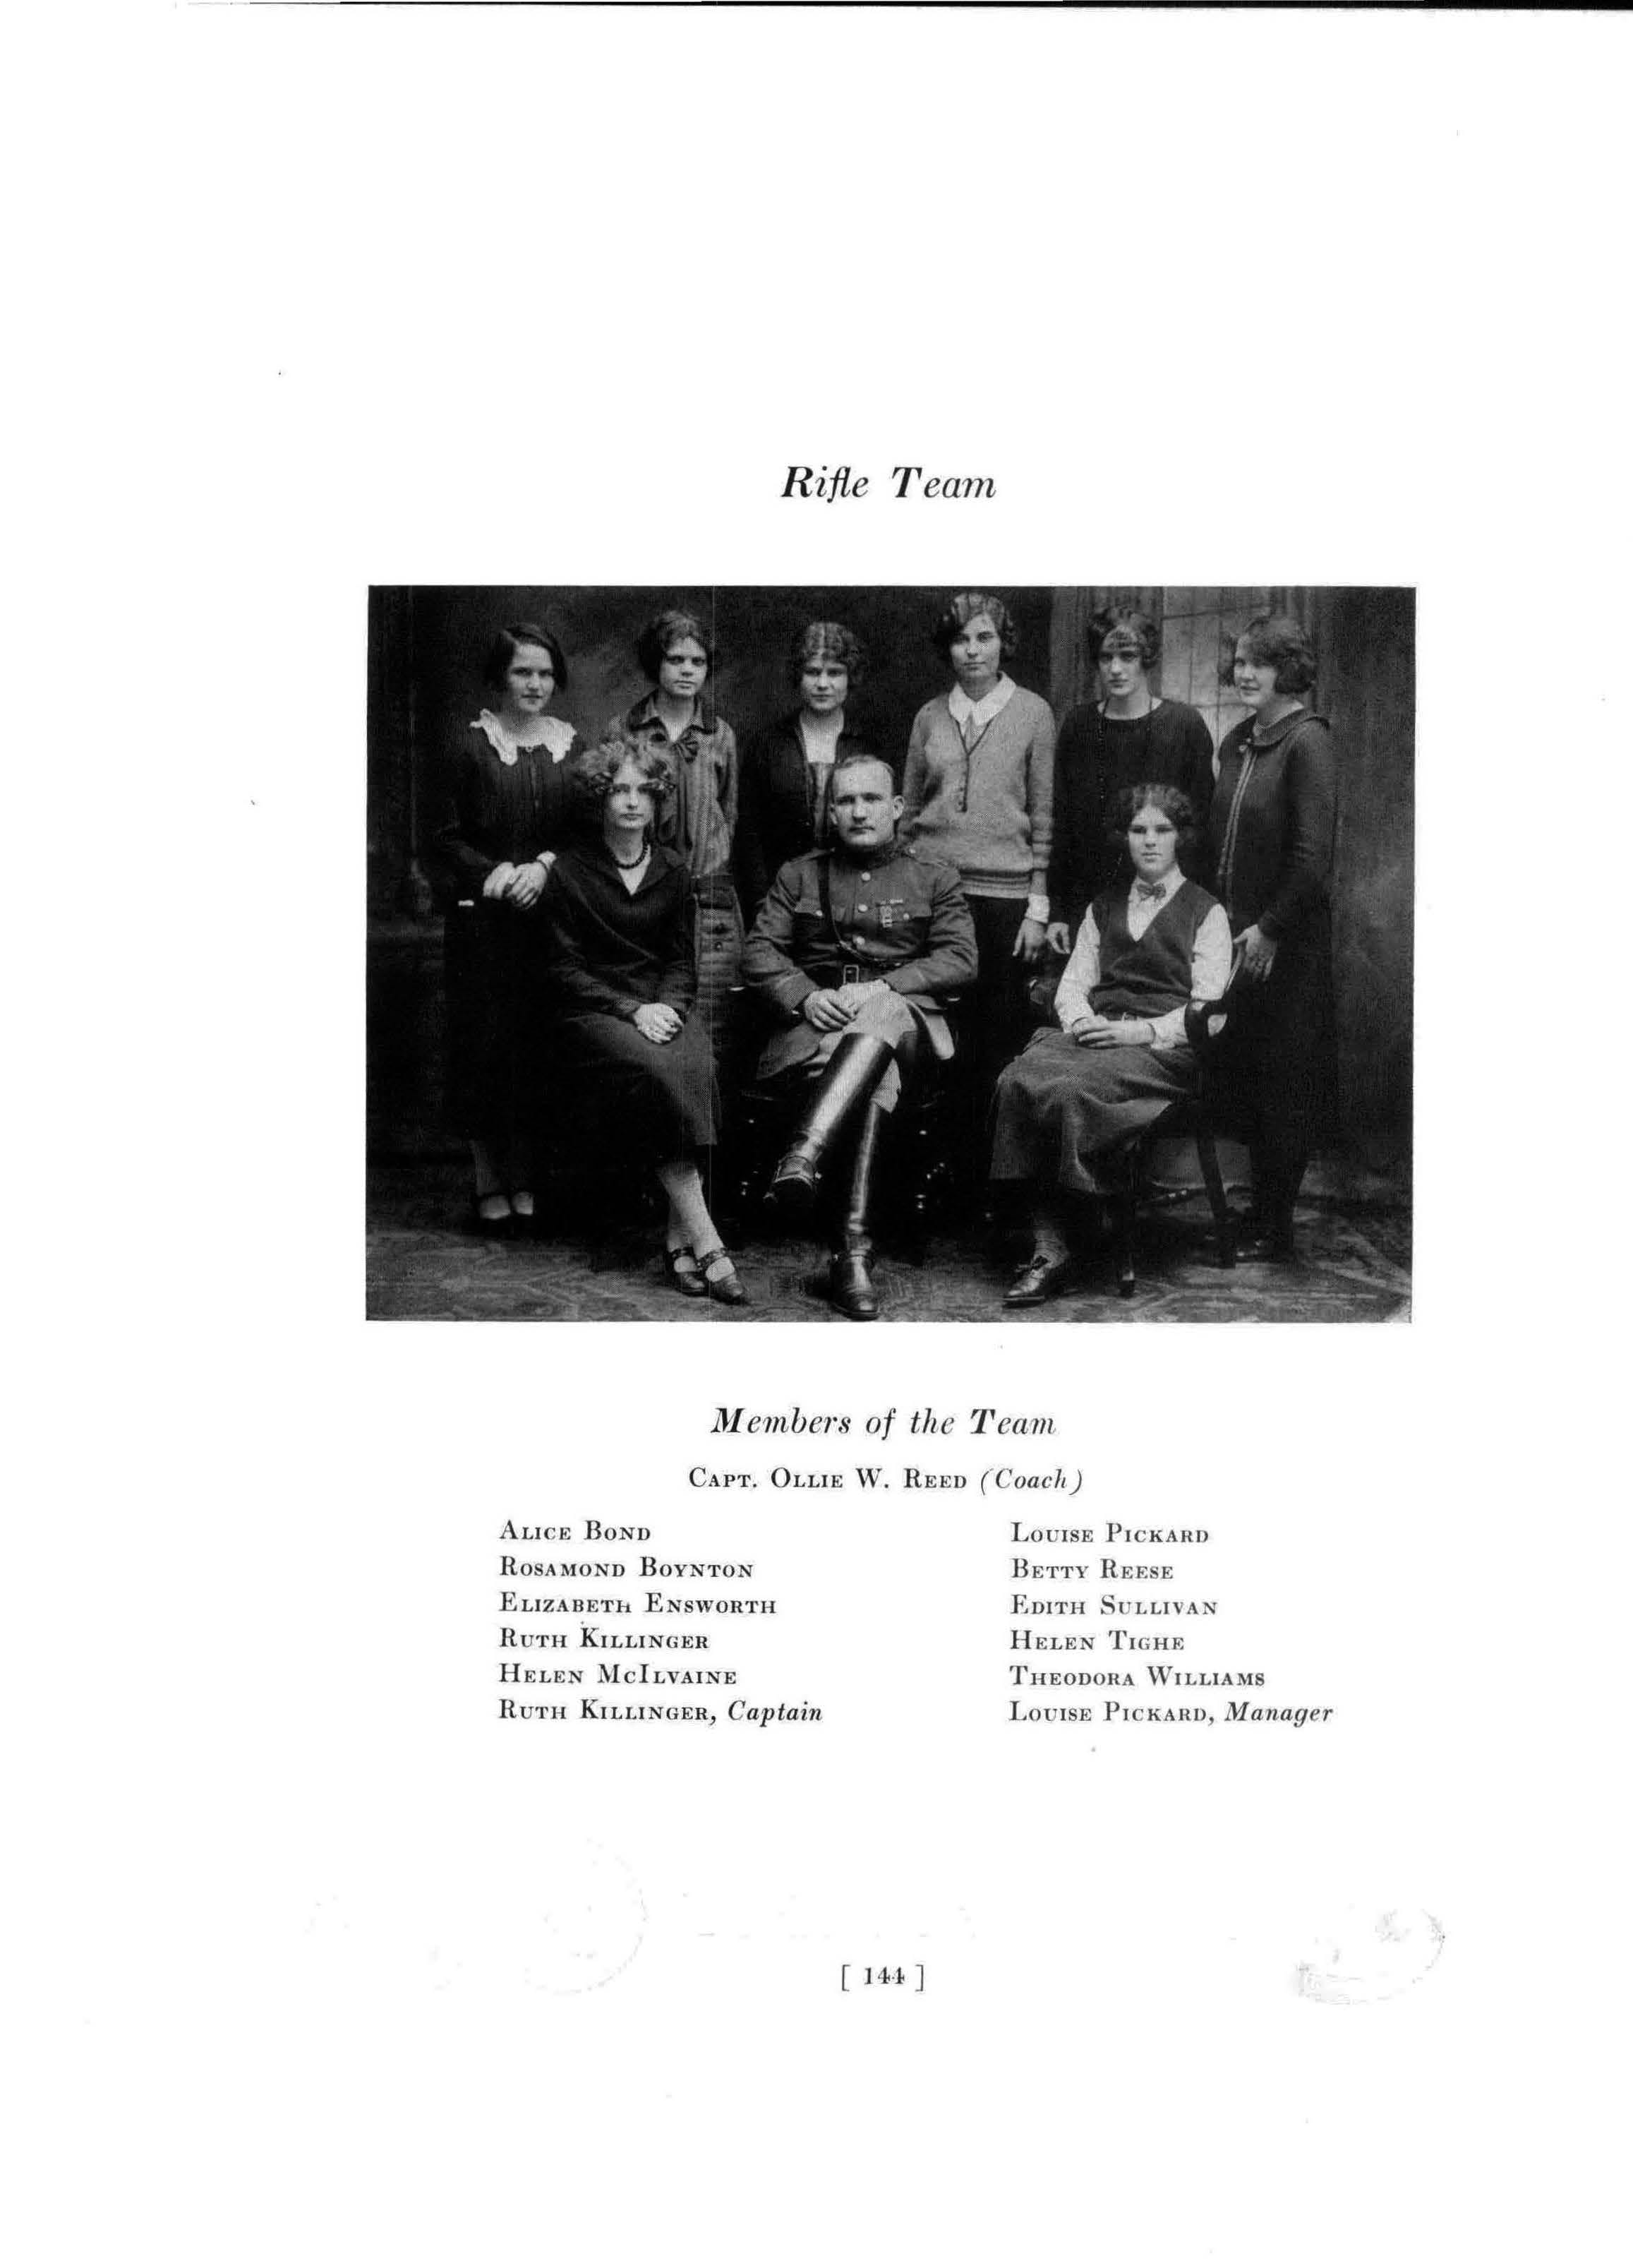 The women's rifle team was highlighted in the 1925 Lexerd yearbook. Photo courtesy Drexel University Archives.